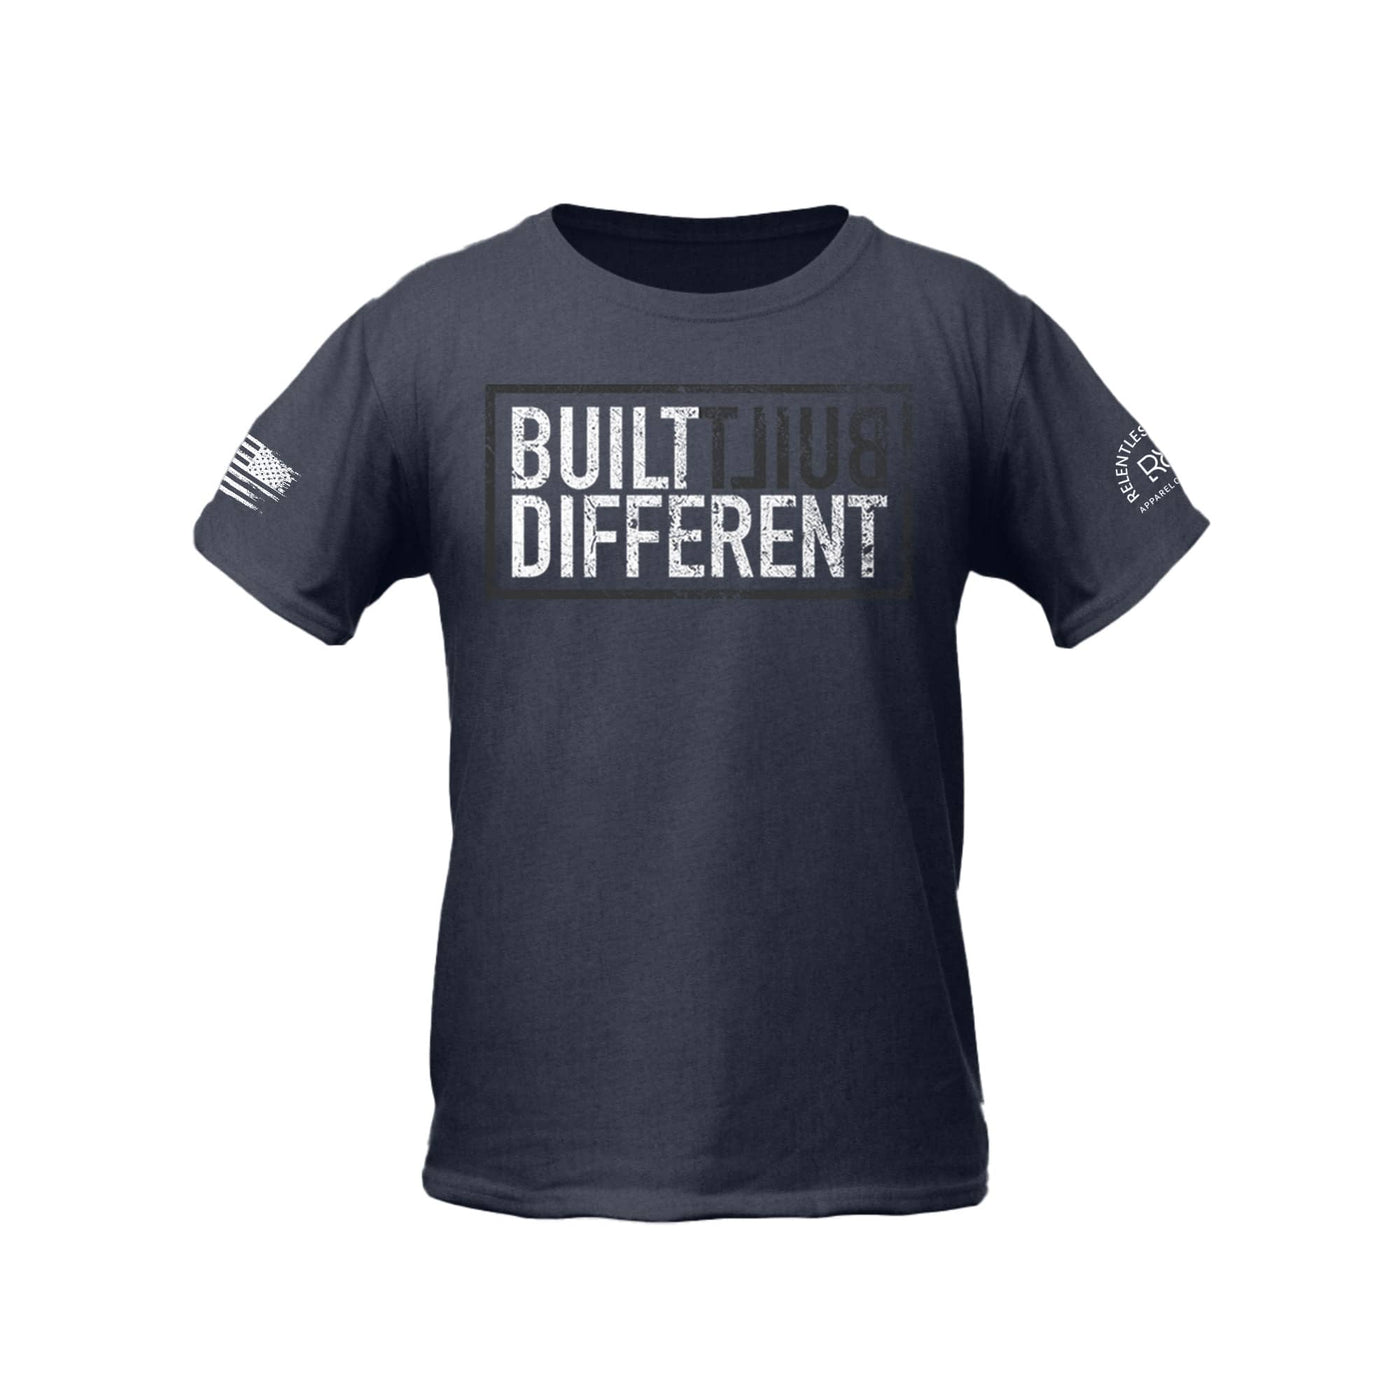 Built Different Youth front design heather navy tee